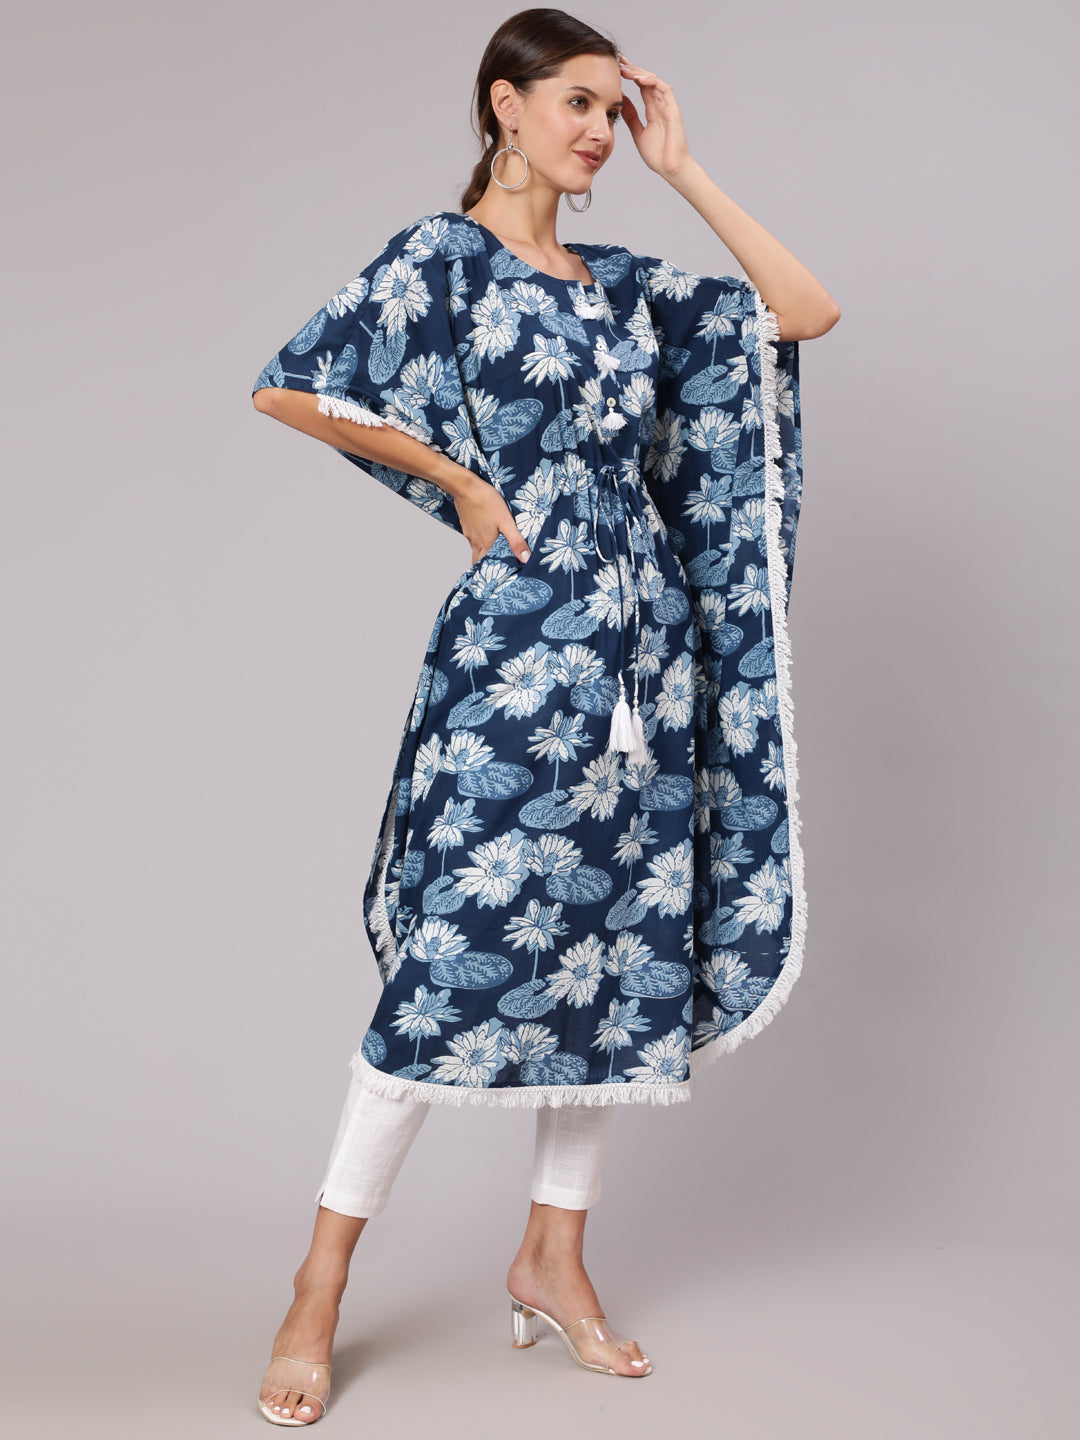 Blue Color Cotton Pigment Floral Printed Kaftan With With Laced Embellishments Paired With Solid White Pants